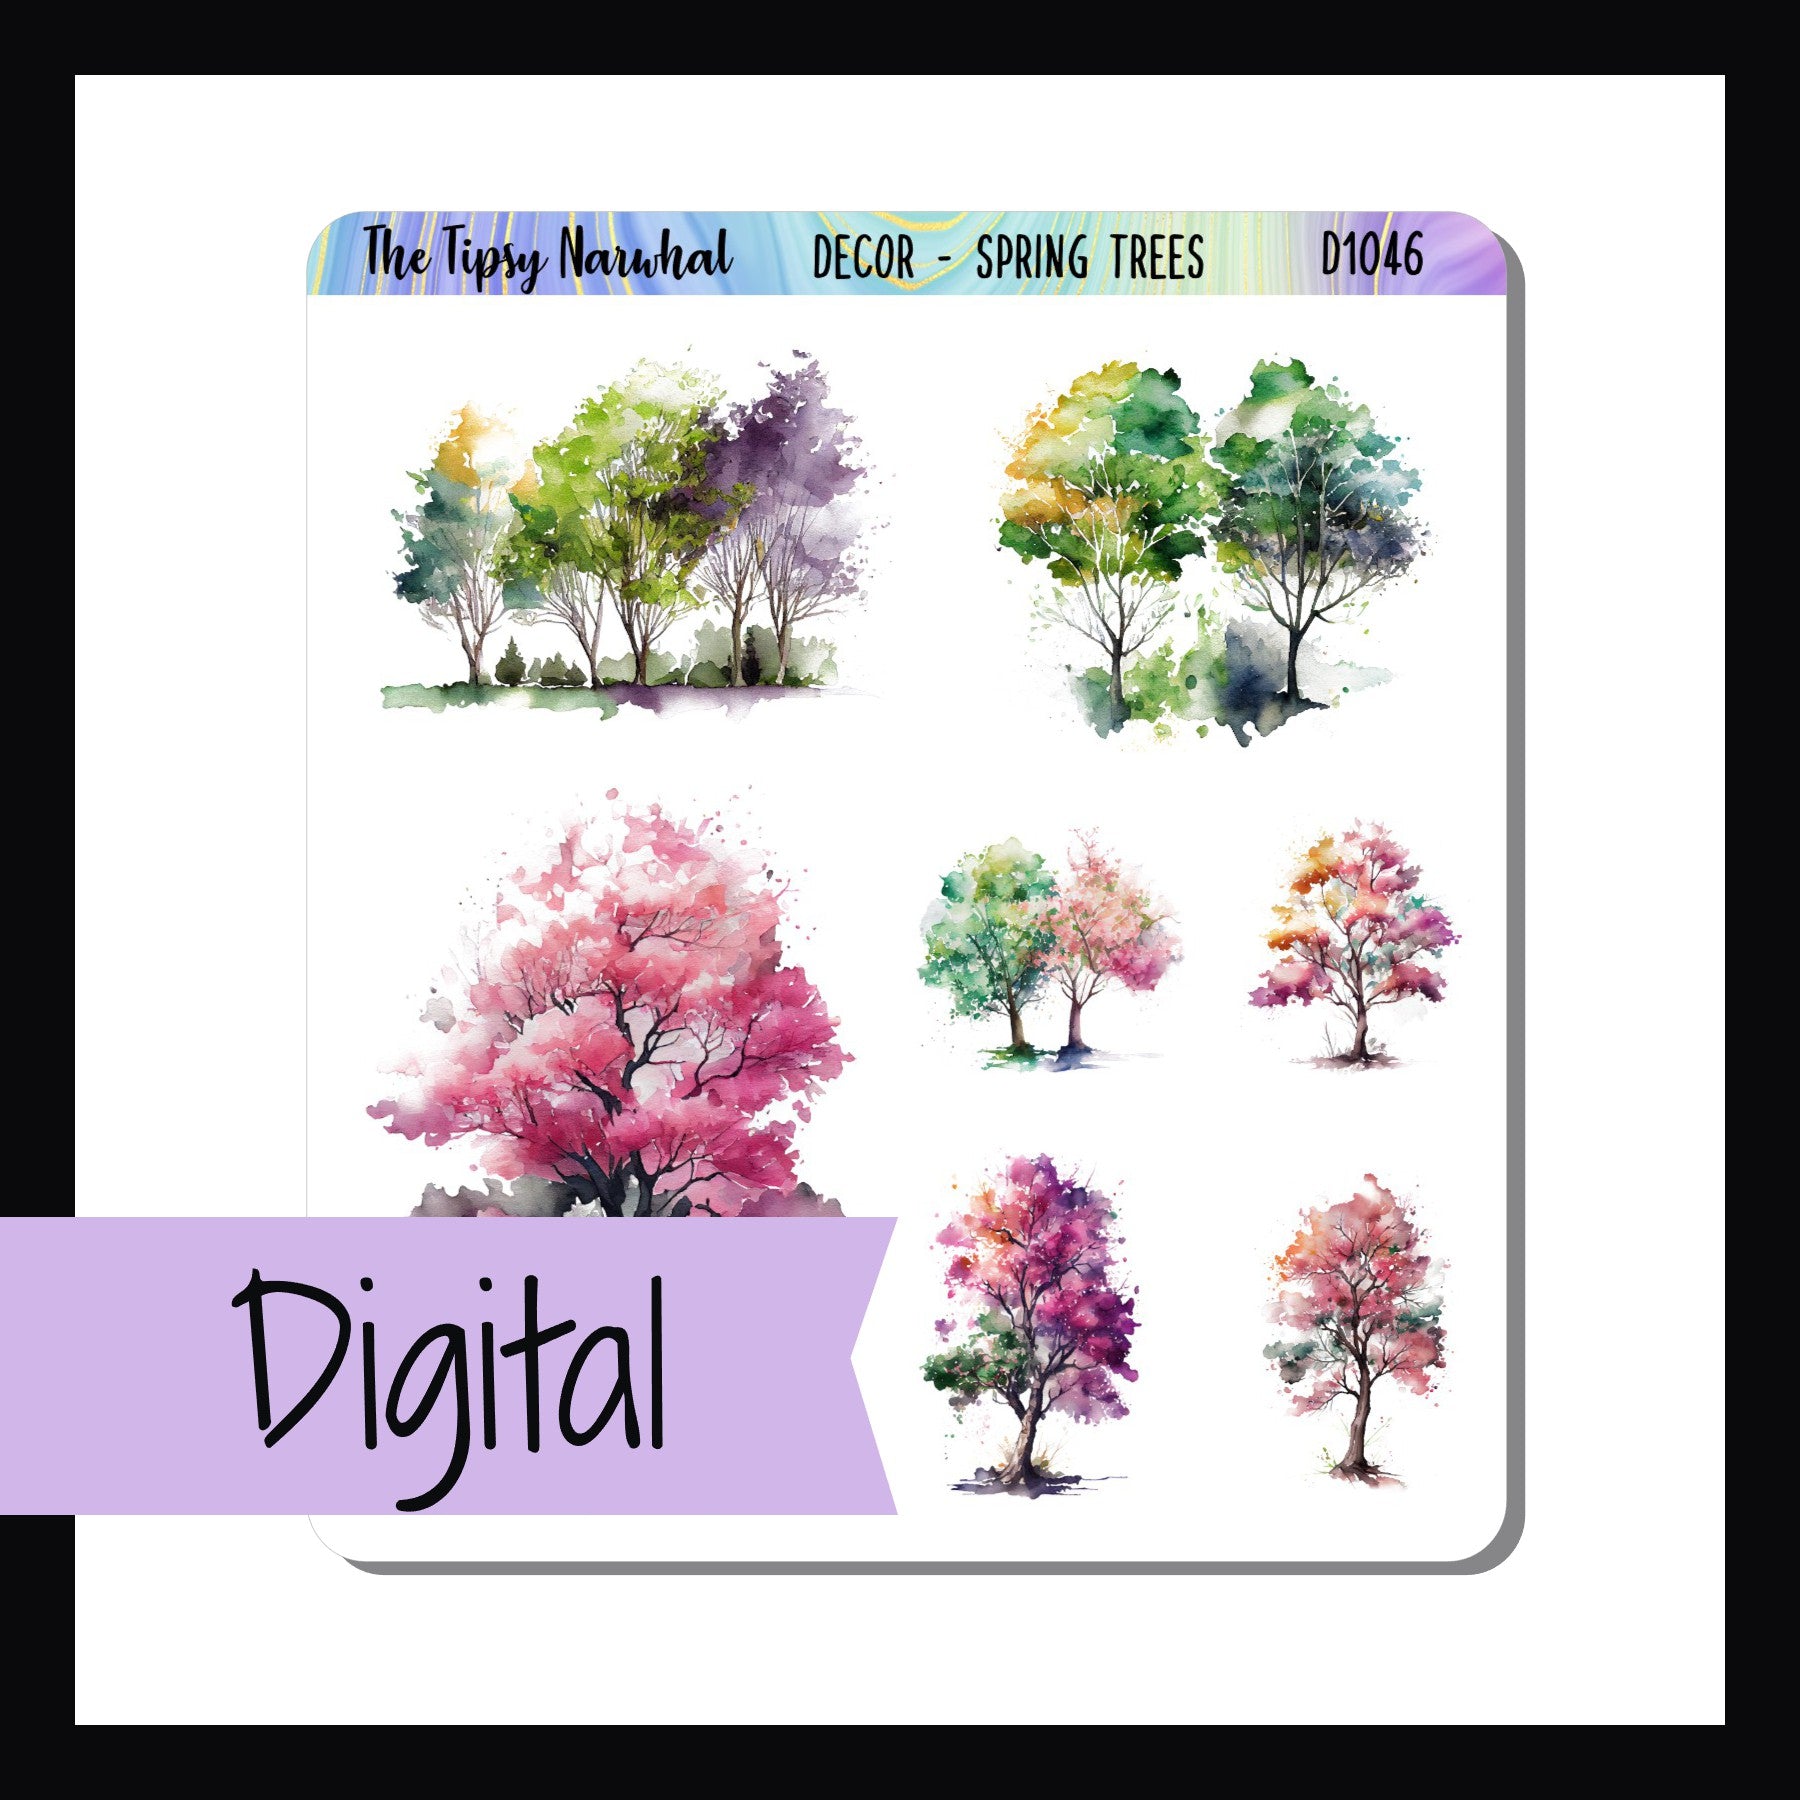 The Digital Spring Trees Decor Sheet is a digital/printable version of the Spring Trees Decor Sheet.  The sheet features 7 stickers of various sizes all depicting trees in the springtime.